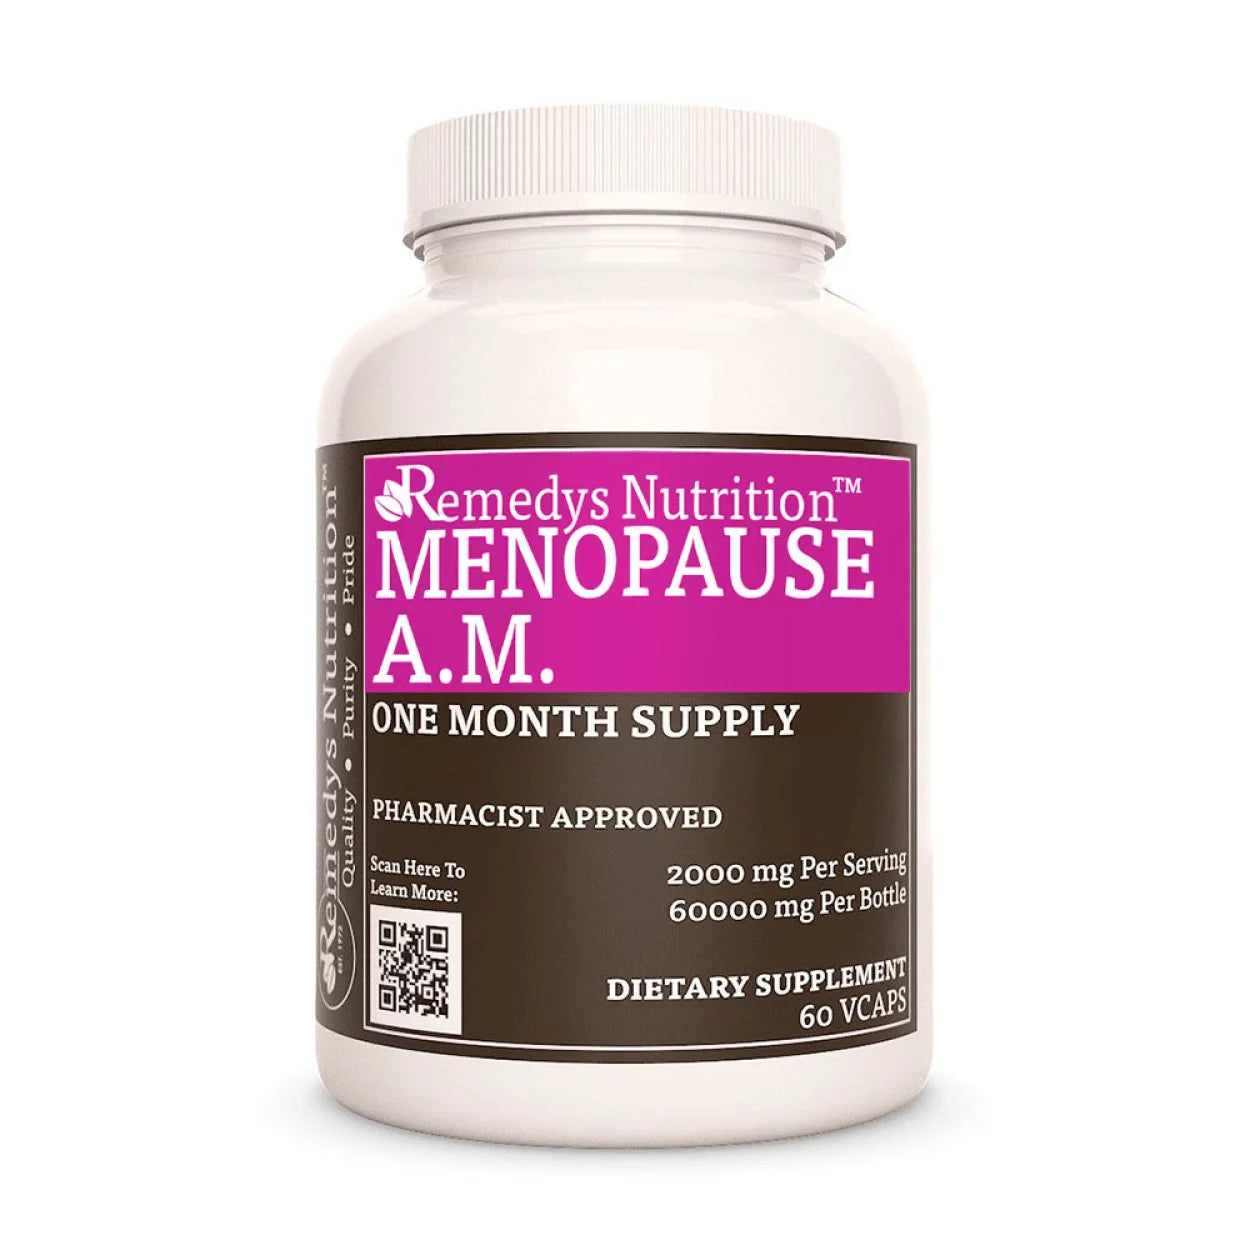 Image of Remedy's Nutrition® Menopause A.M.™ Capsules Herbal Dietary Supplement front bottle Made in USA. Raspberry Spearmint